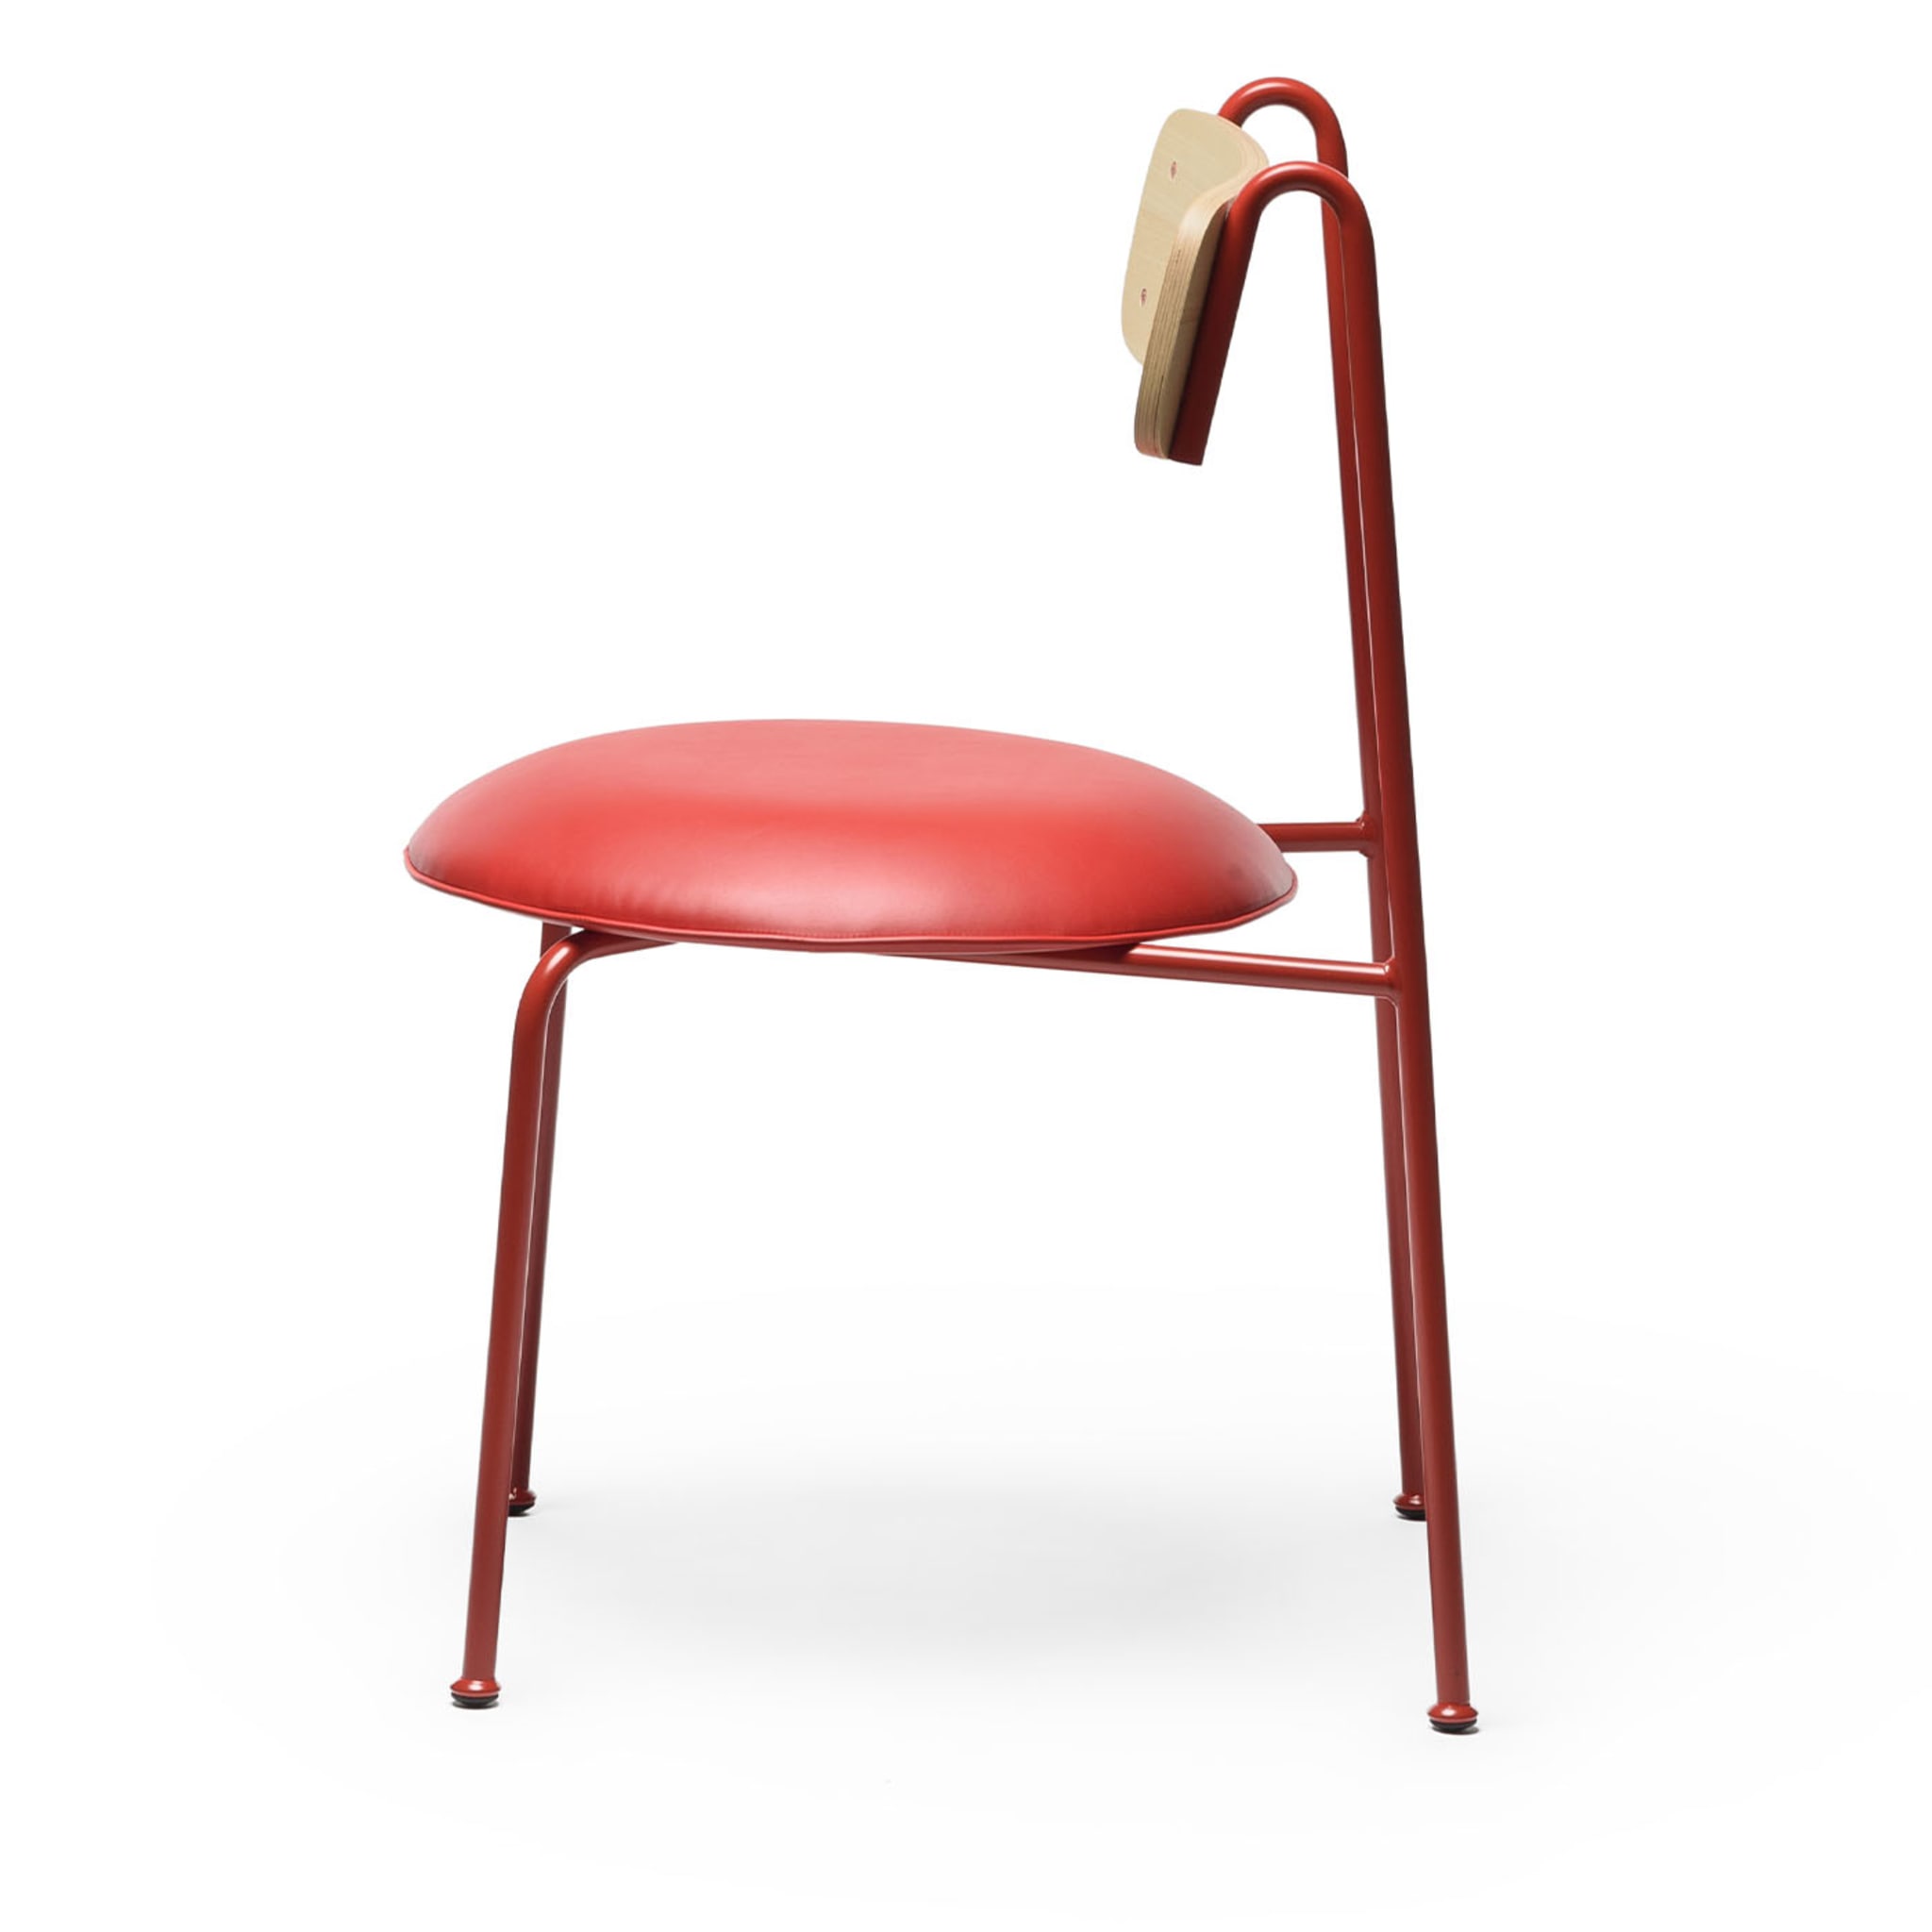 Lena S Red And Natural Ash Chair By Designerd - Alternative view 4